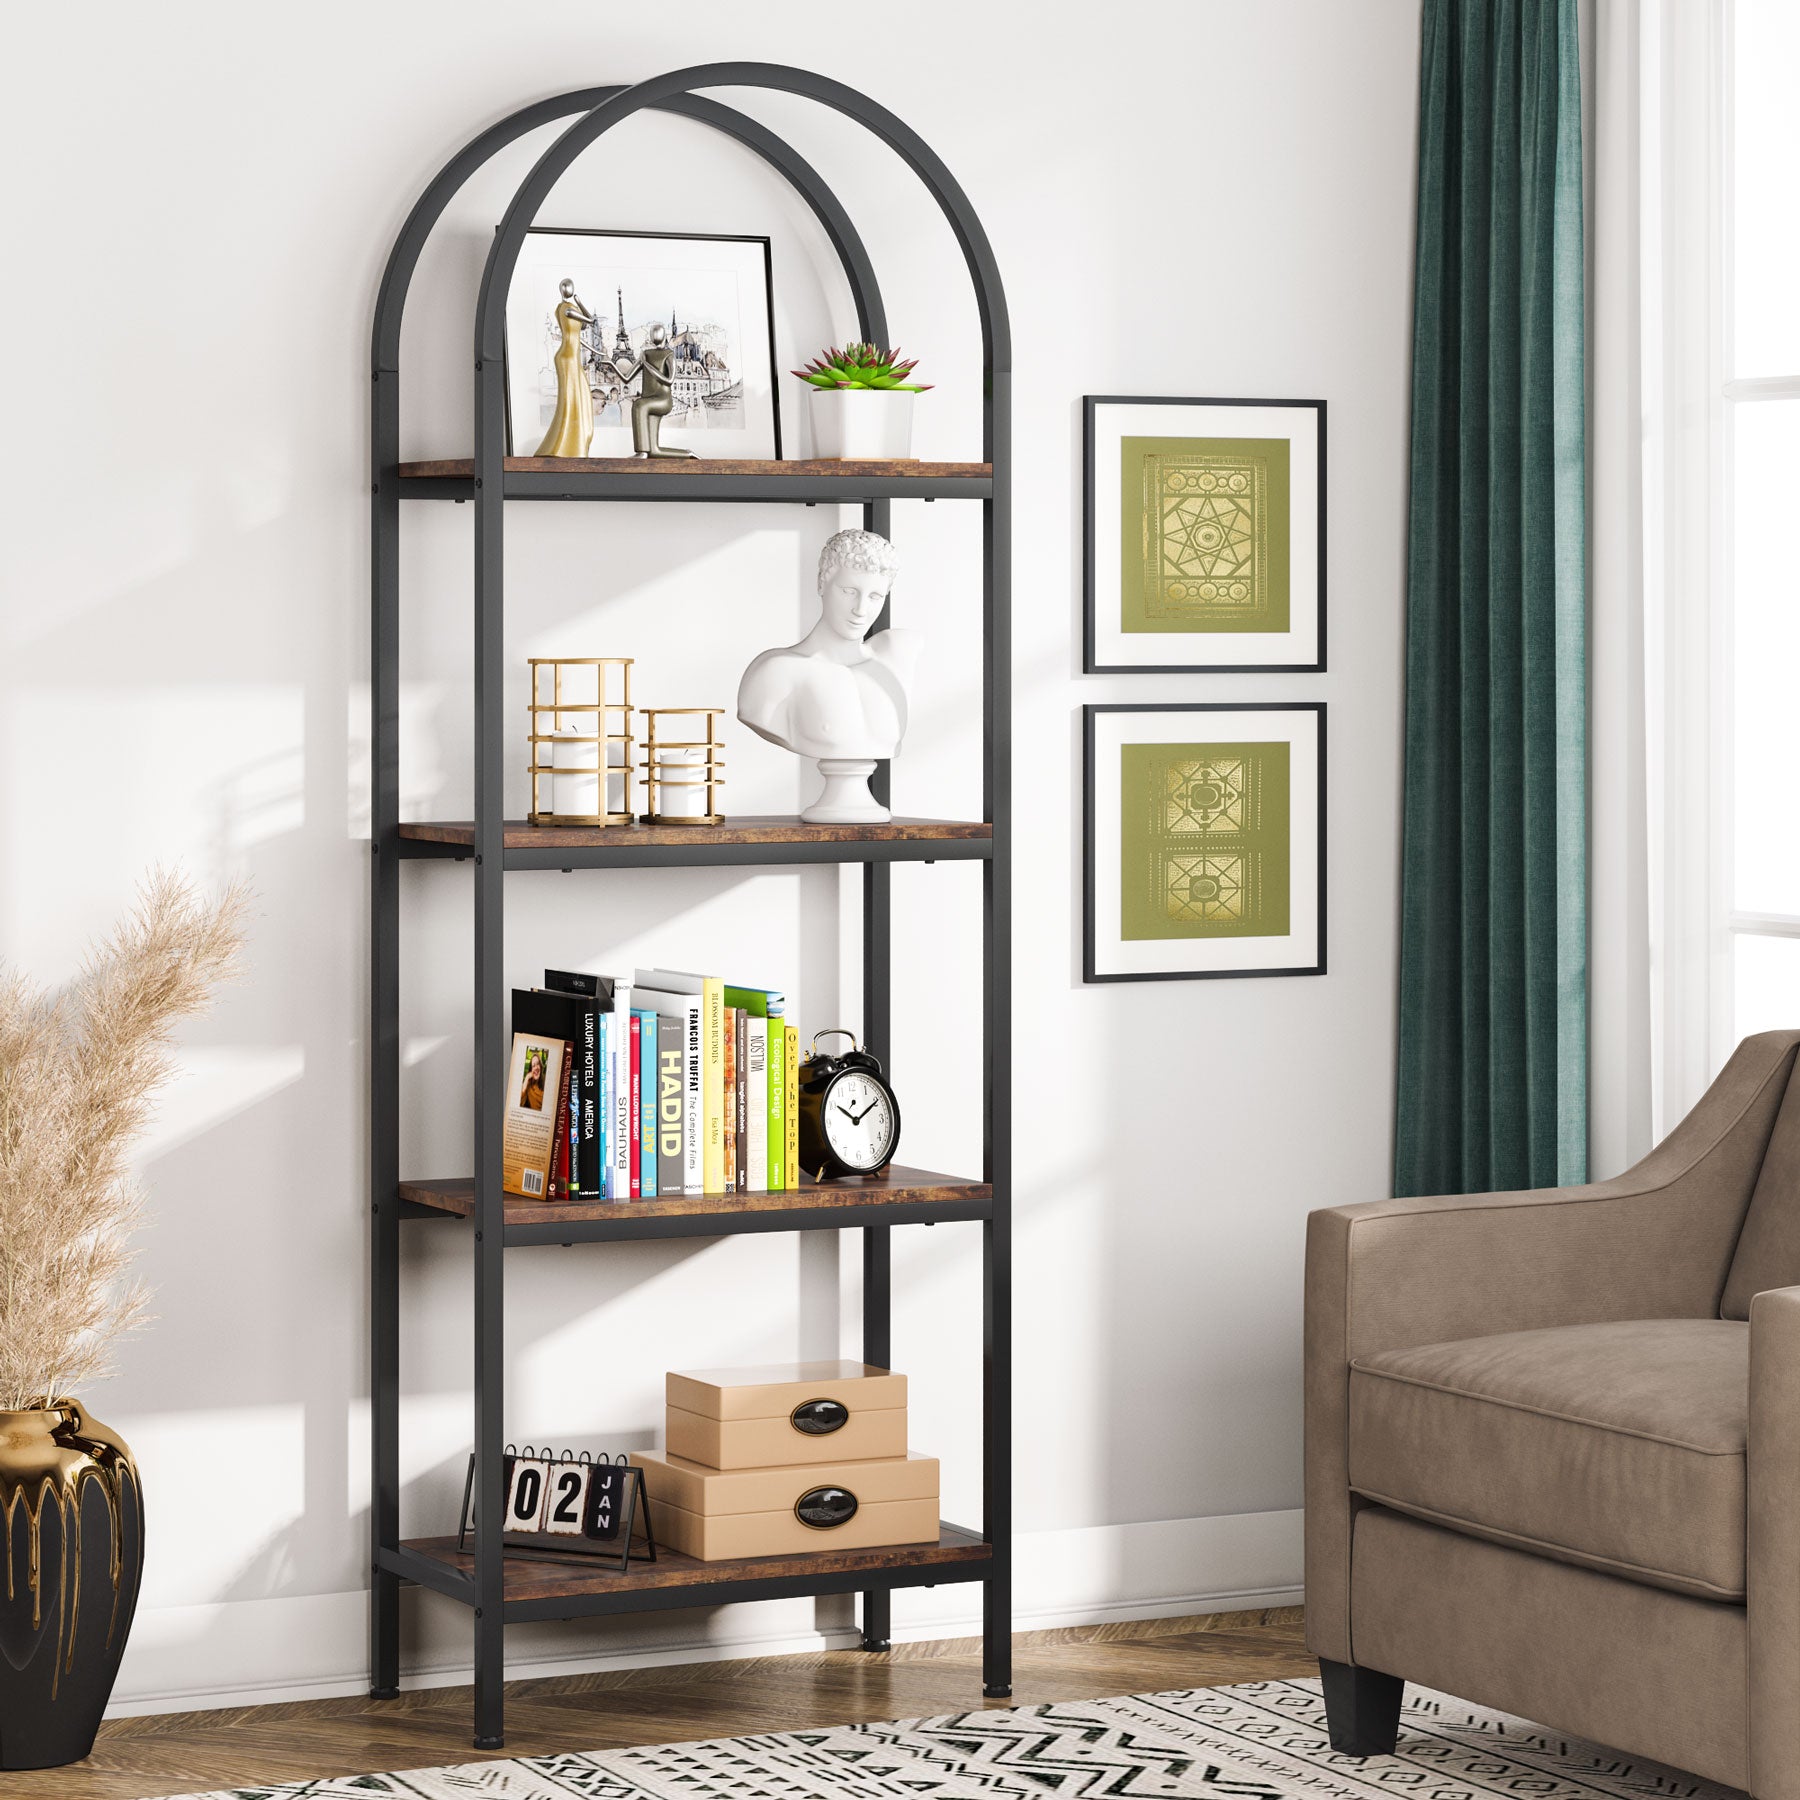 Home Office 4-Tier Bookshelf, Simple Industrial Bookcase Standing Shelf  Unit Storage Organizer with 4 Open